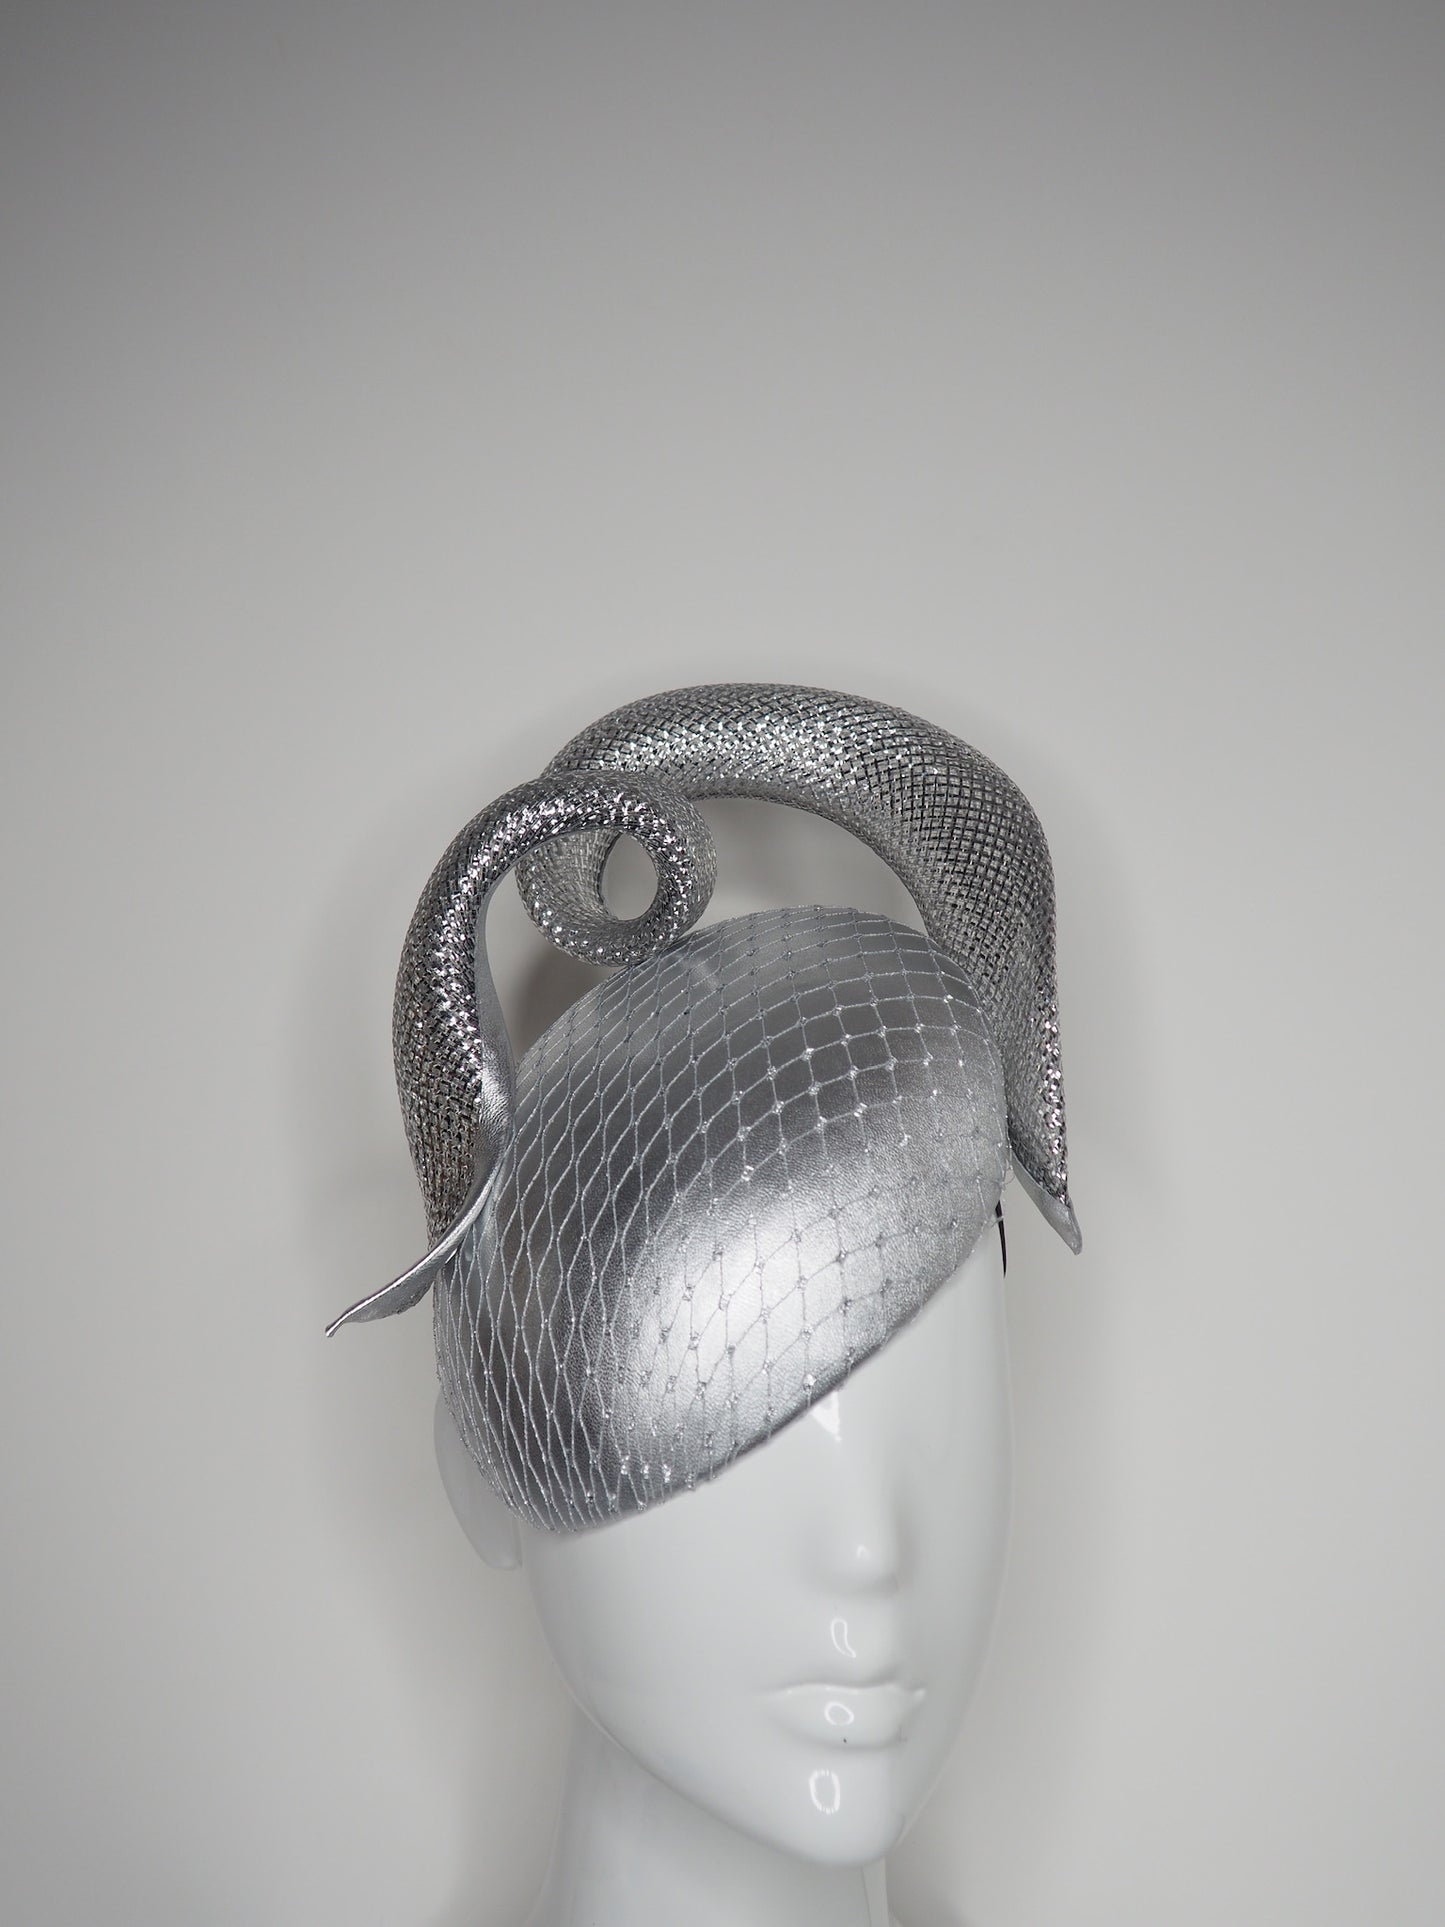 Silver siren - Silver leather facehugger beret with crinoline swirl and veiling detail